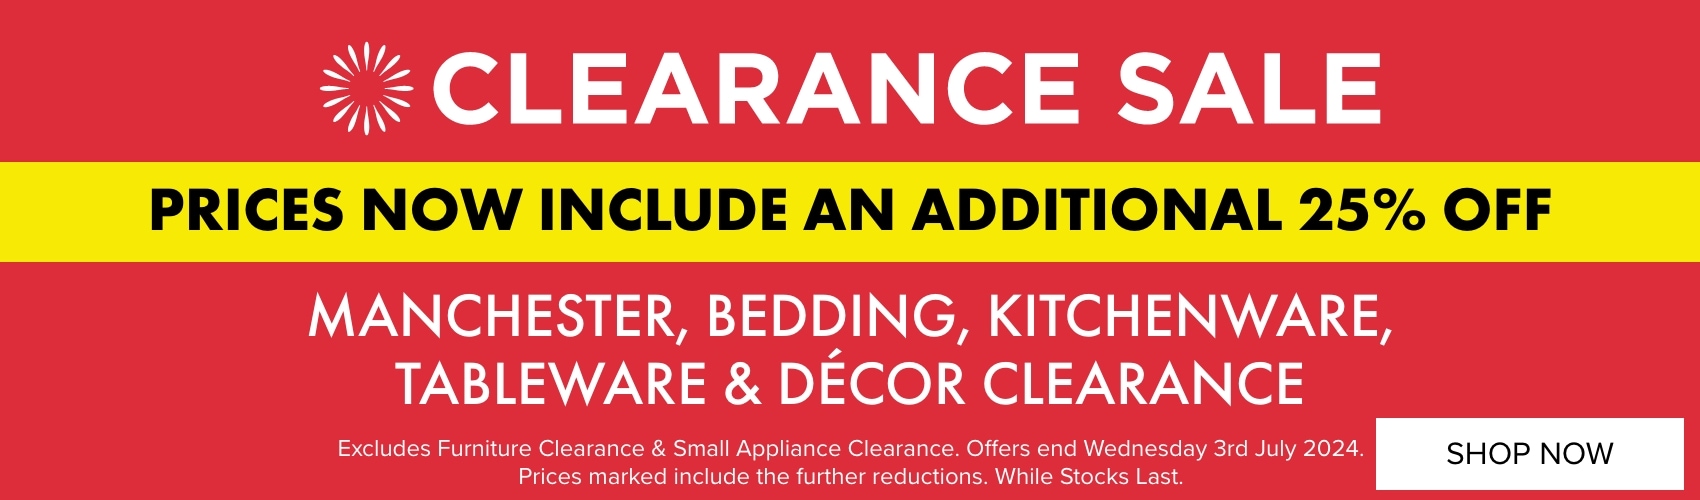 CLEARANCE SALE: Prices now include an additional 25% OFF Manchester, Bedding, Kitchenware, Tableware & Décor Clearance 